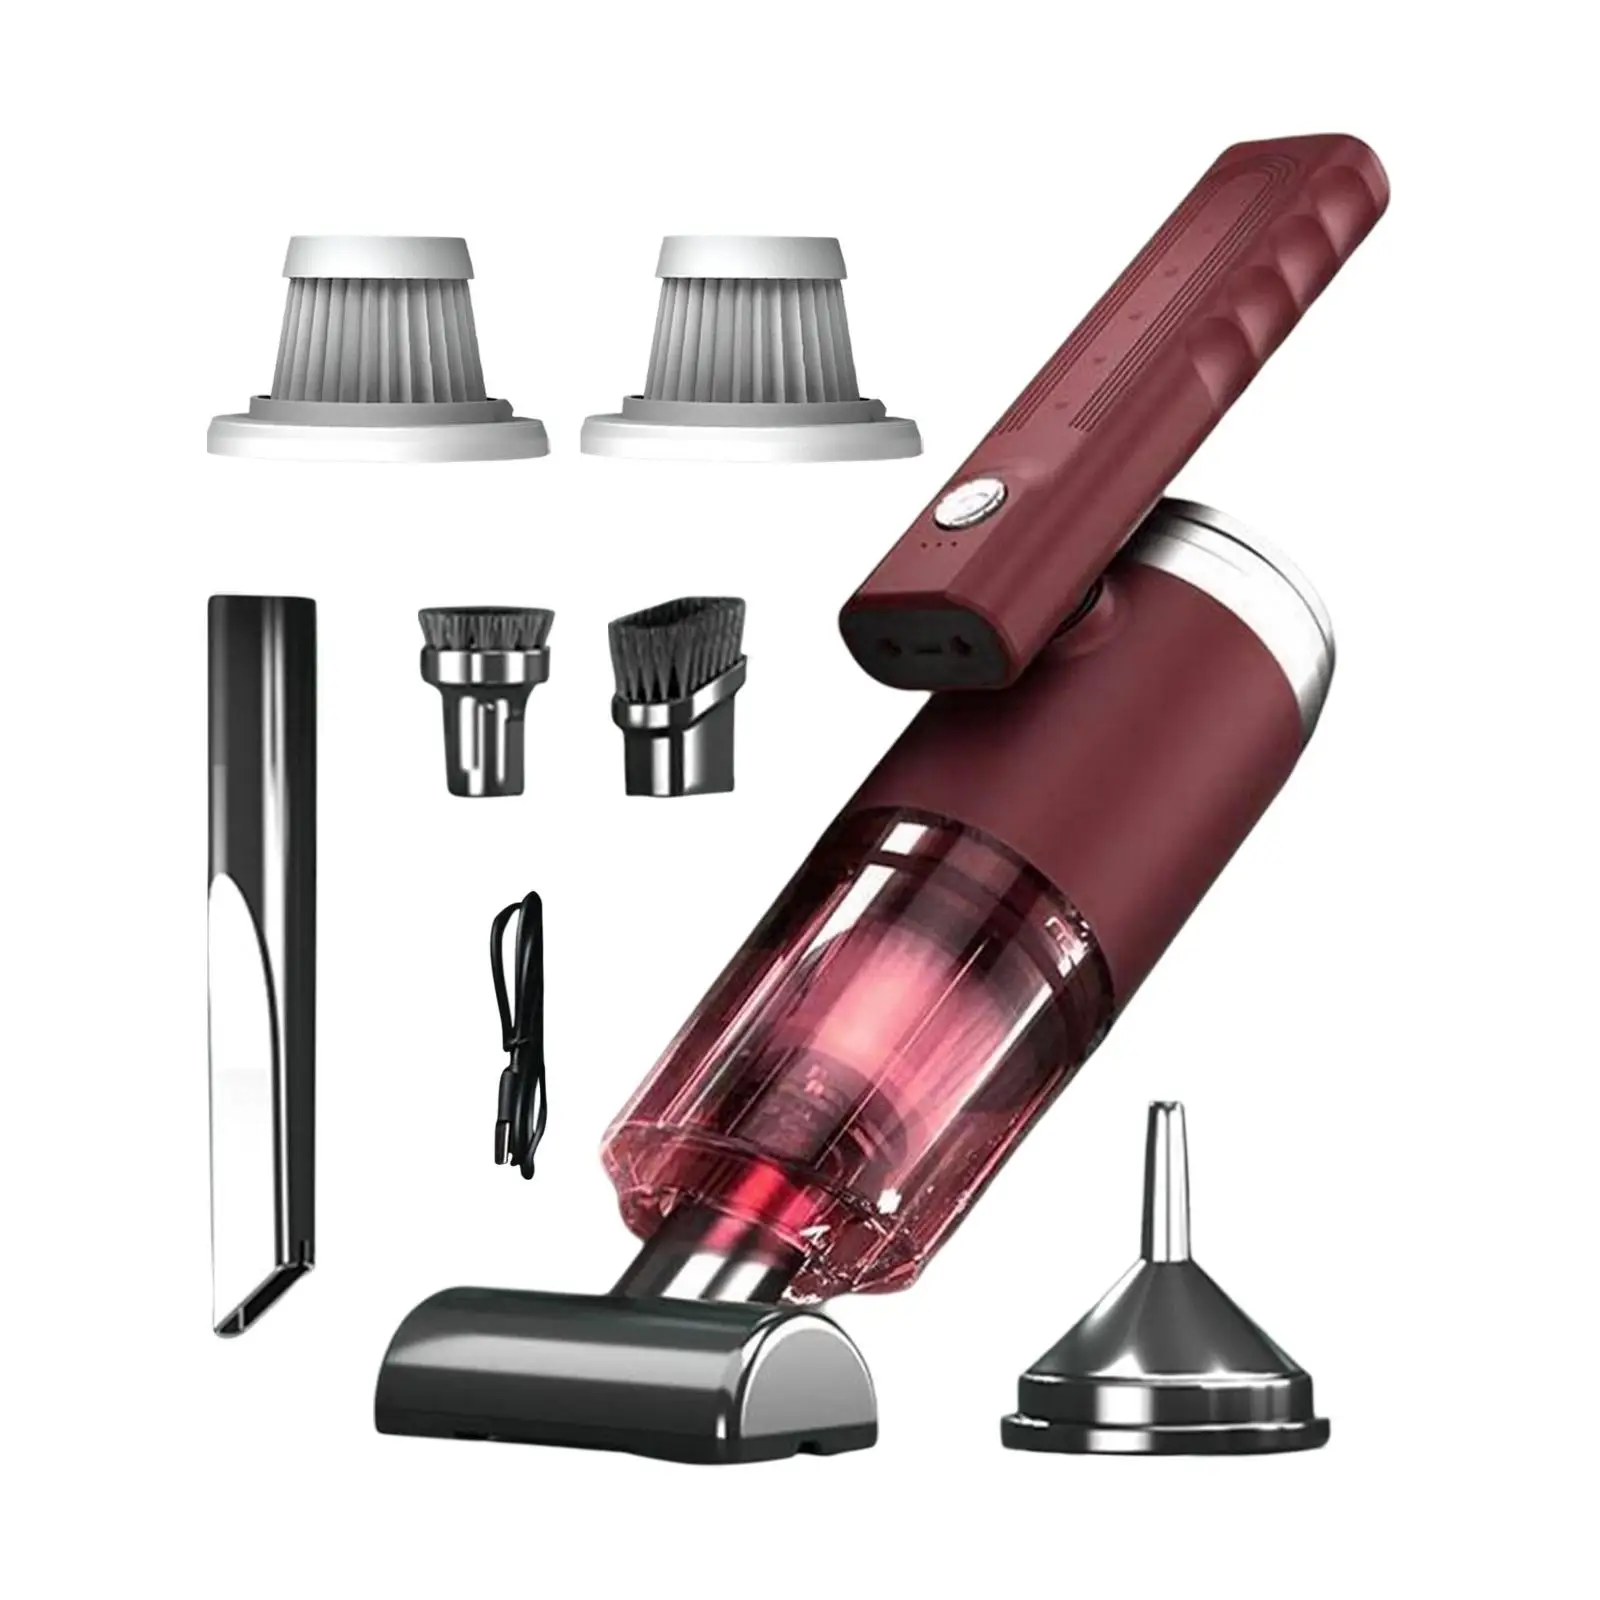 Car Vacuum Cleaner, Mini Vacuum Cleaner, Rechargeable Dust Collector Powerful